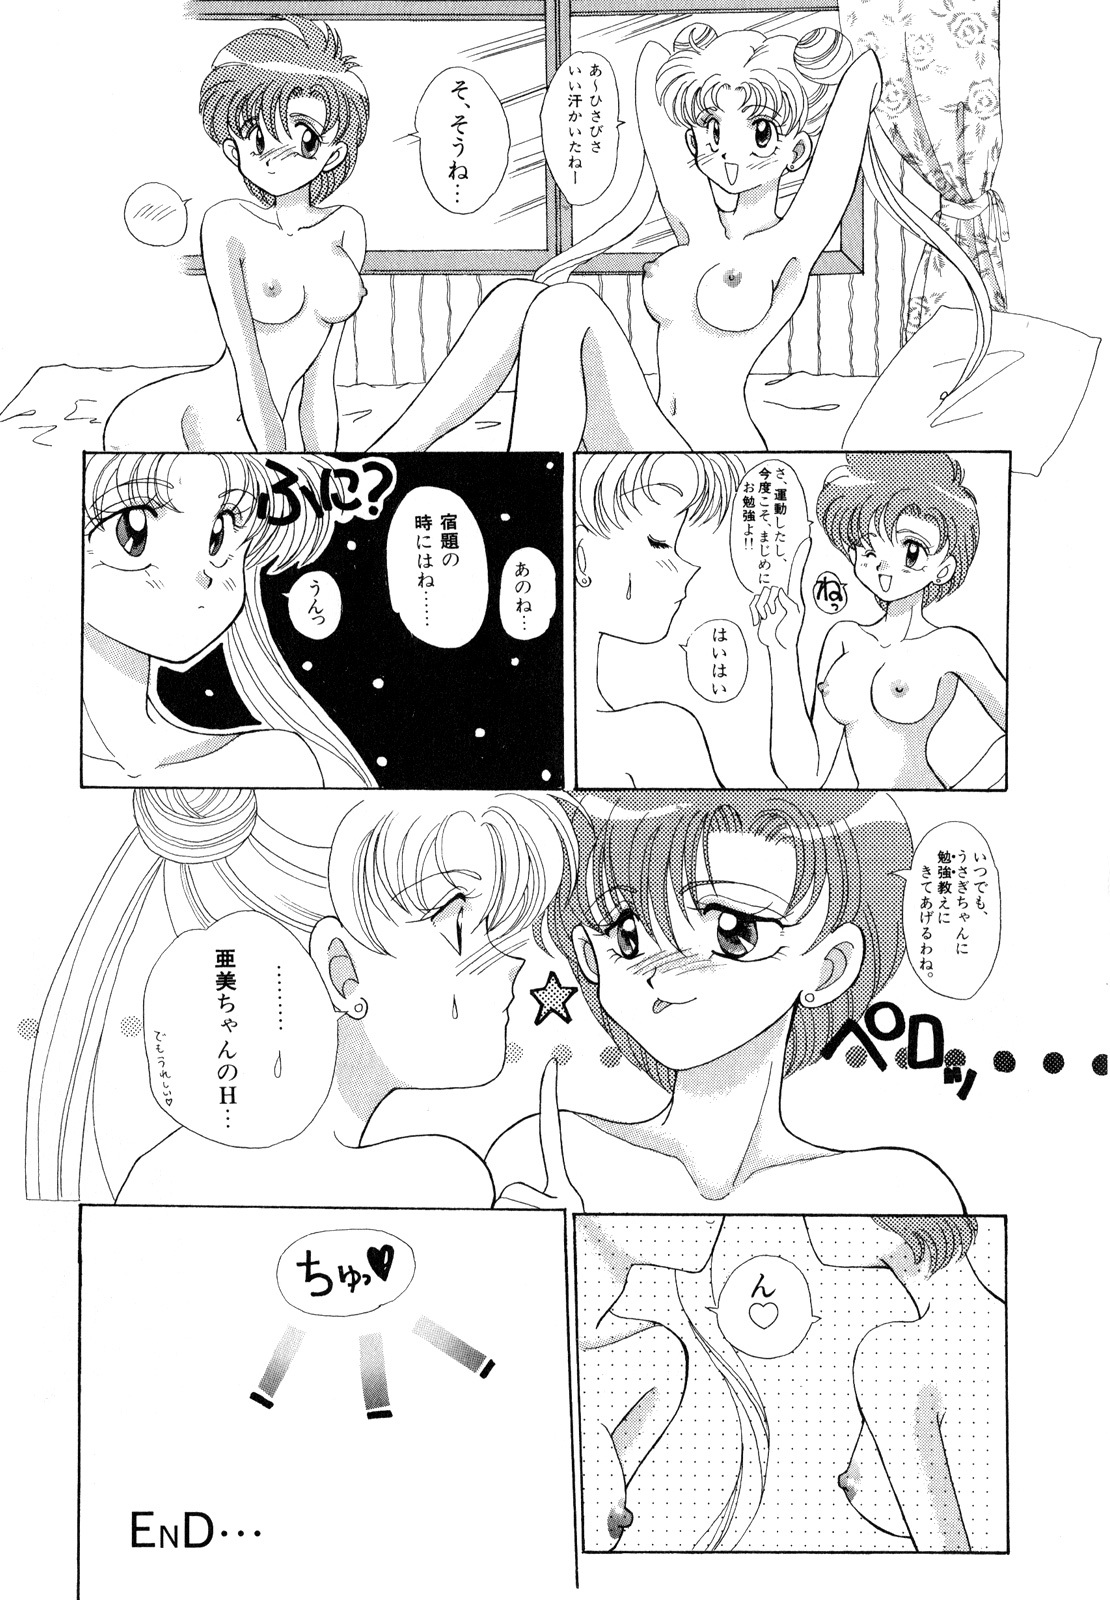 [Anthology] Lunatic Party 3 (Sailor Moon) page 40 full